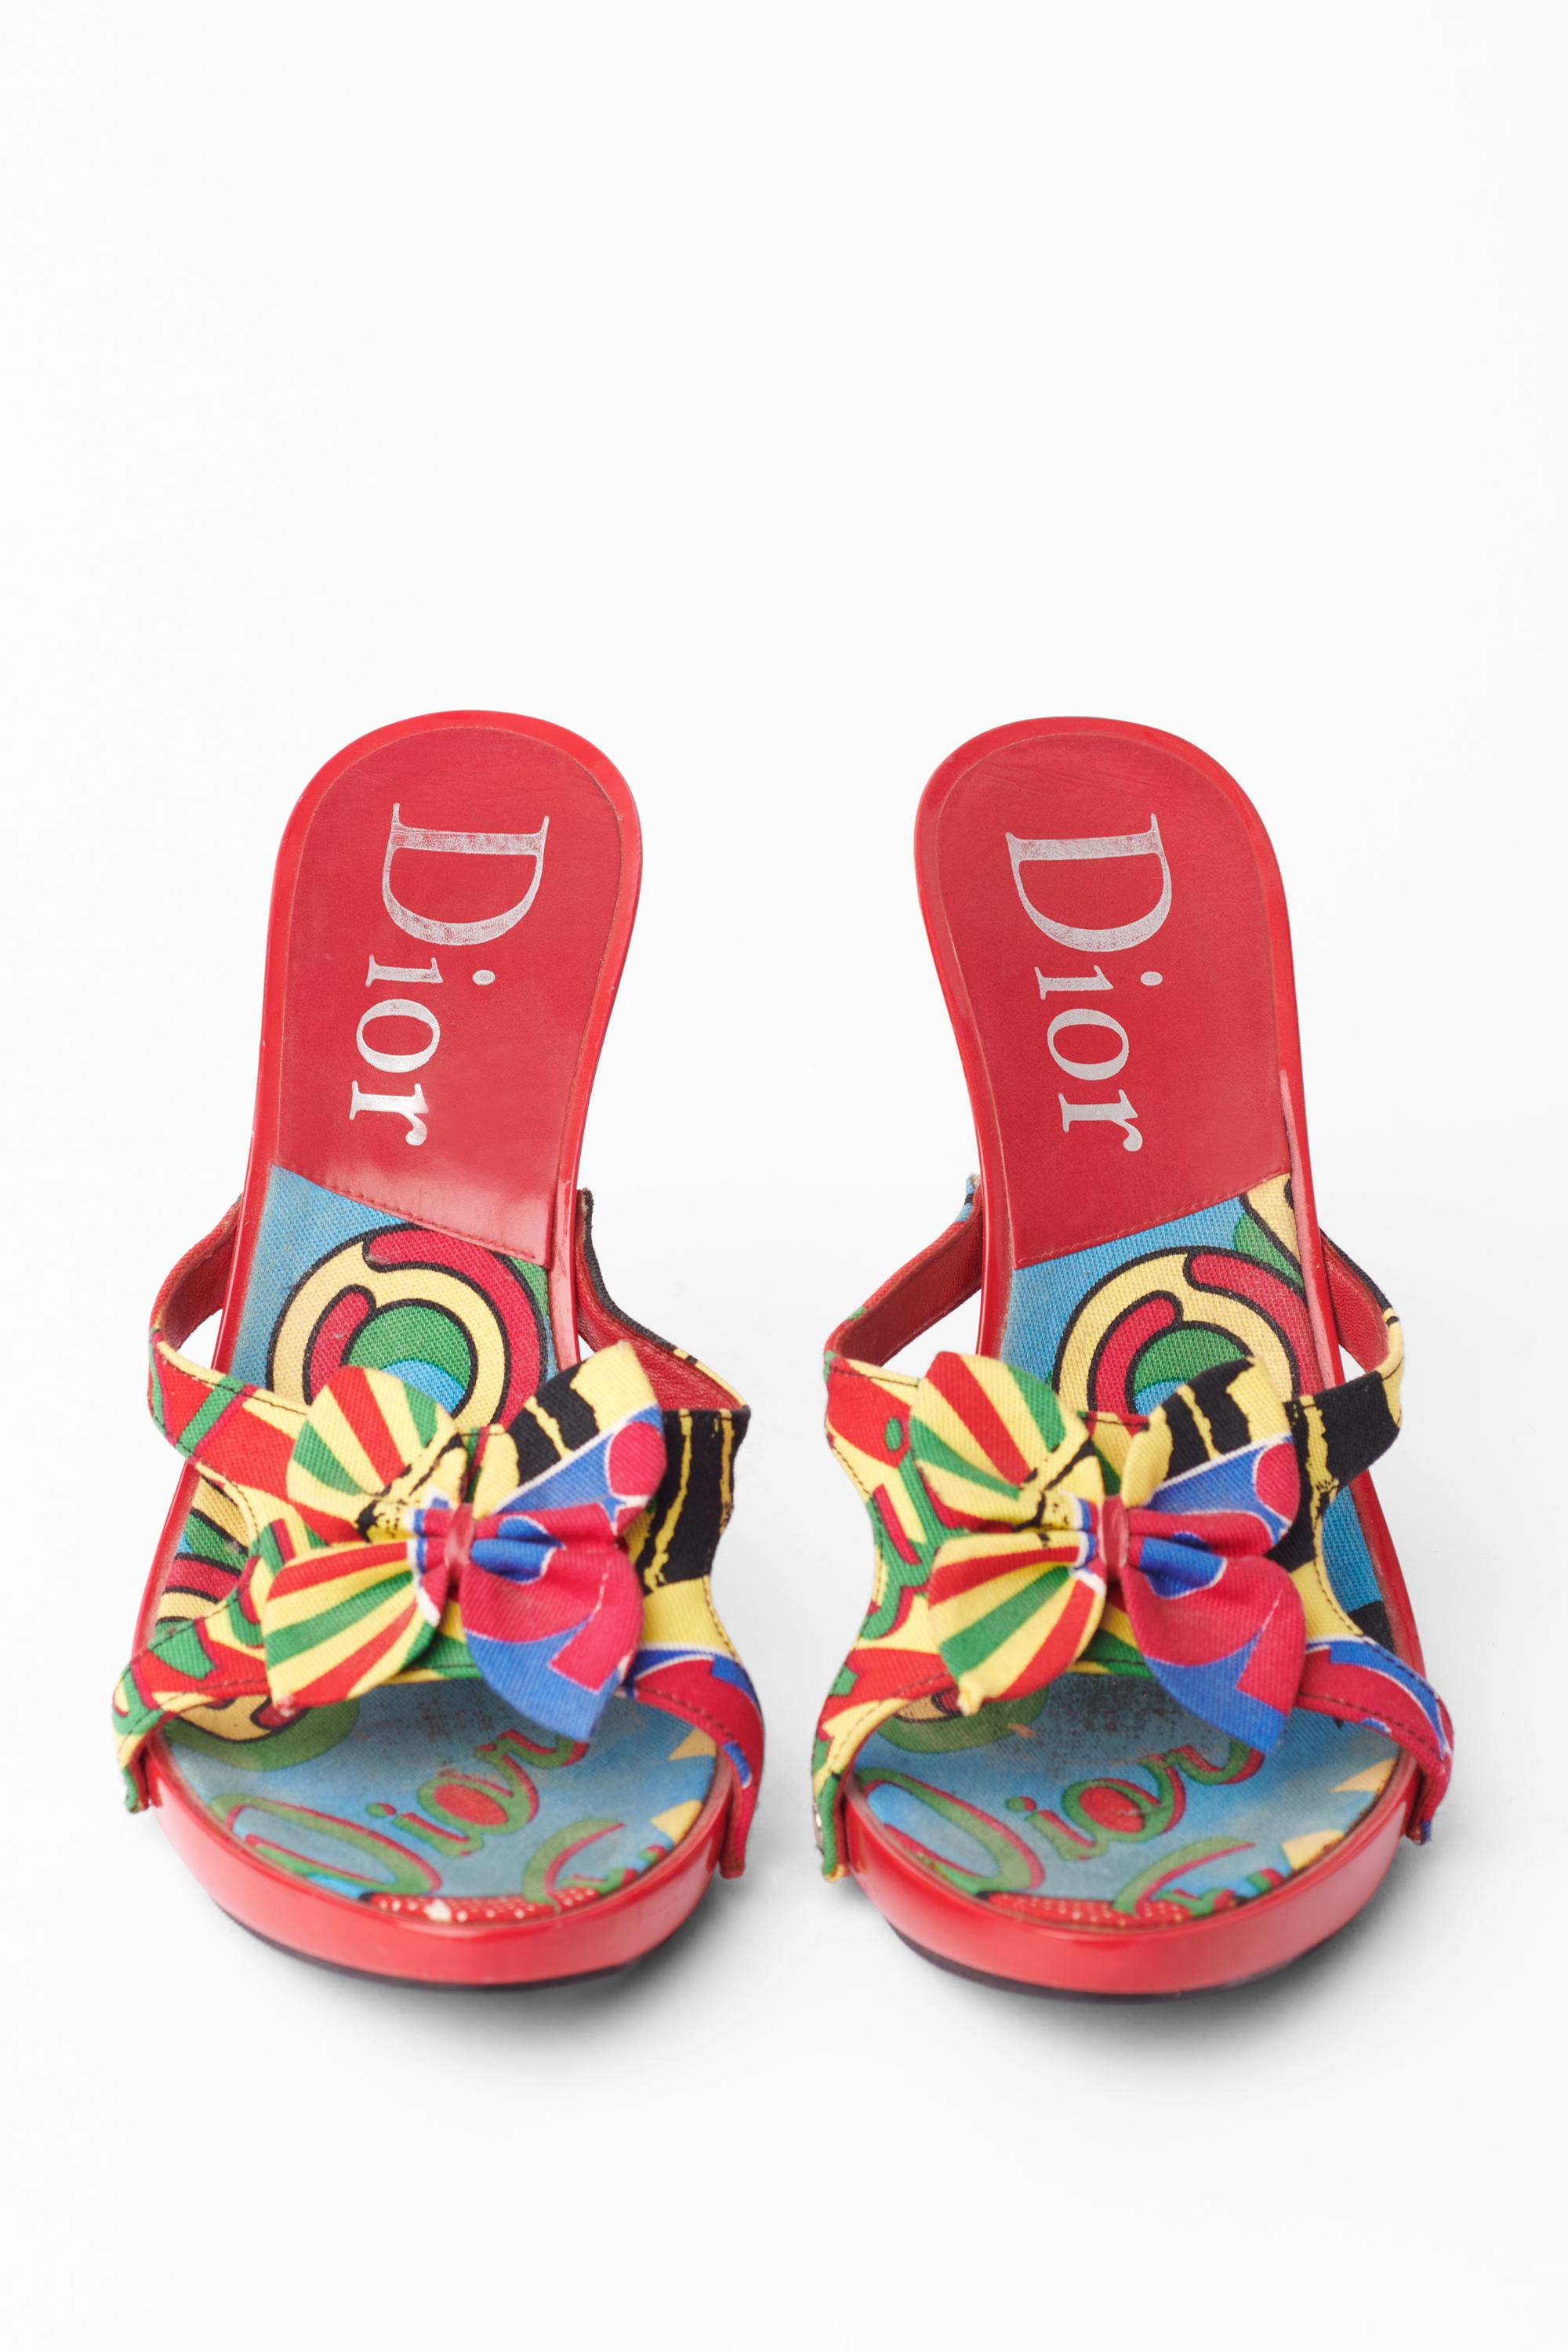 Vintage Christian Dior 2004 Rasta print heels. Features rasta pattern print all-over, butterfly bow at front, cut out front and high heel.
Brand: Christian Dior
Color: Multi
Size: UK 4
Tag Size: 37
Modern Size: UK: 4, US: 6, EU: 37
Year / Season: